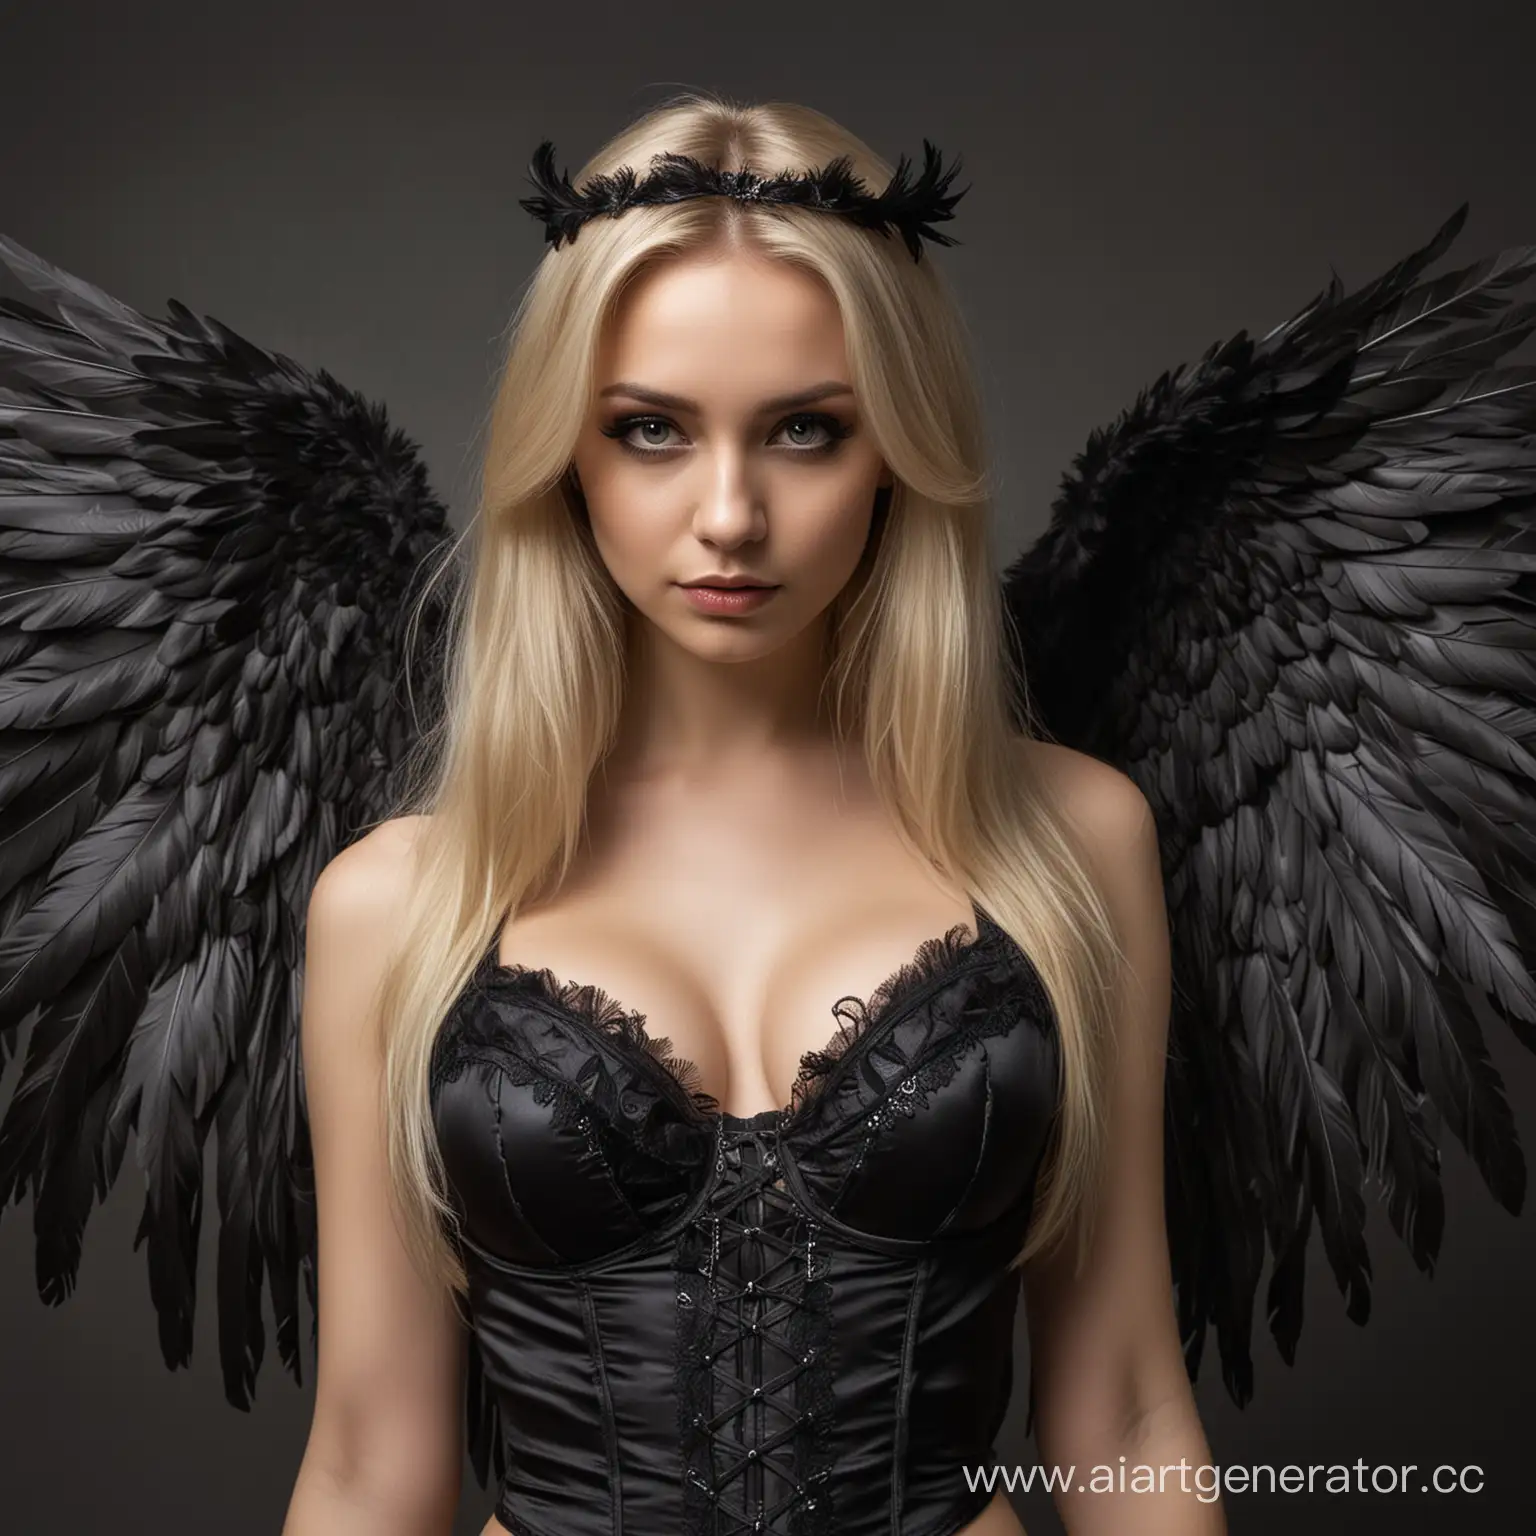 Hyperrealism-Portrait-of-a-Gothic-Dark-Angel-with-Blonde-Hair-and-Feathered-Wings